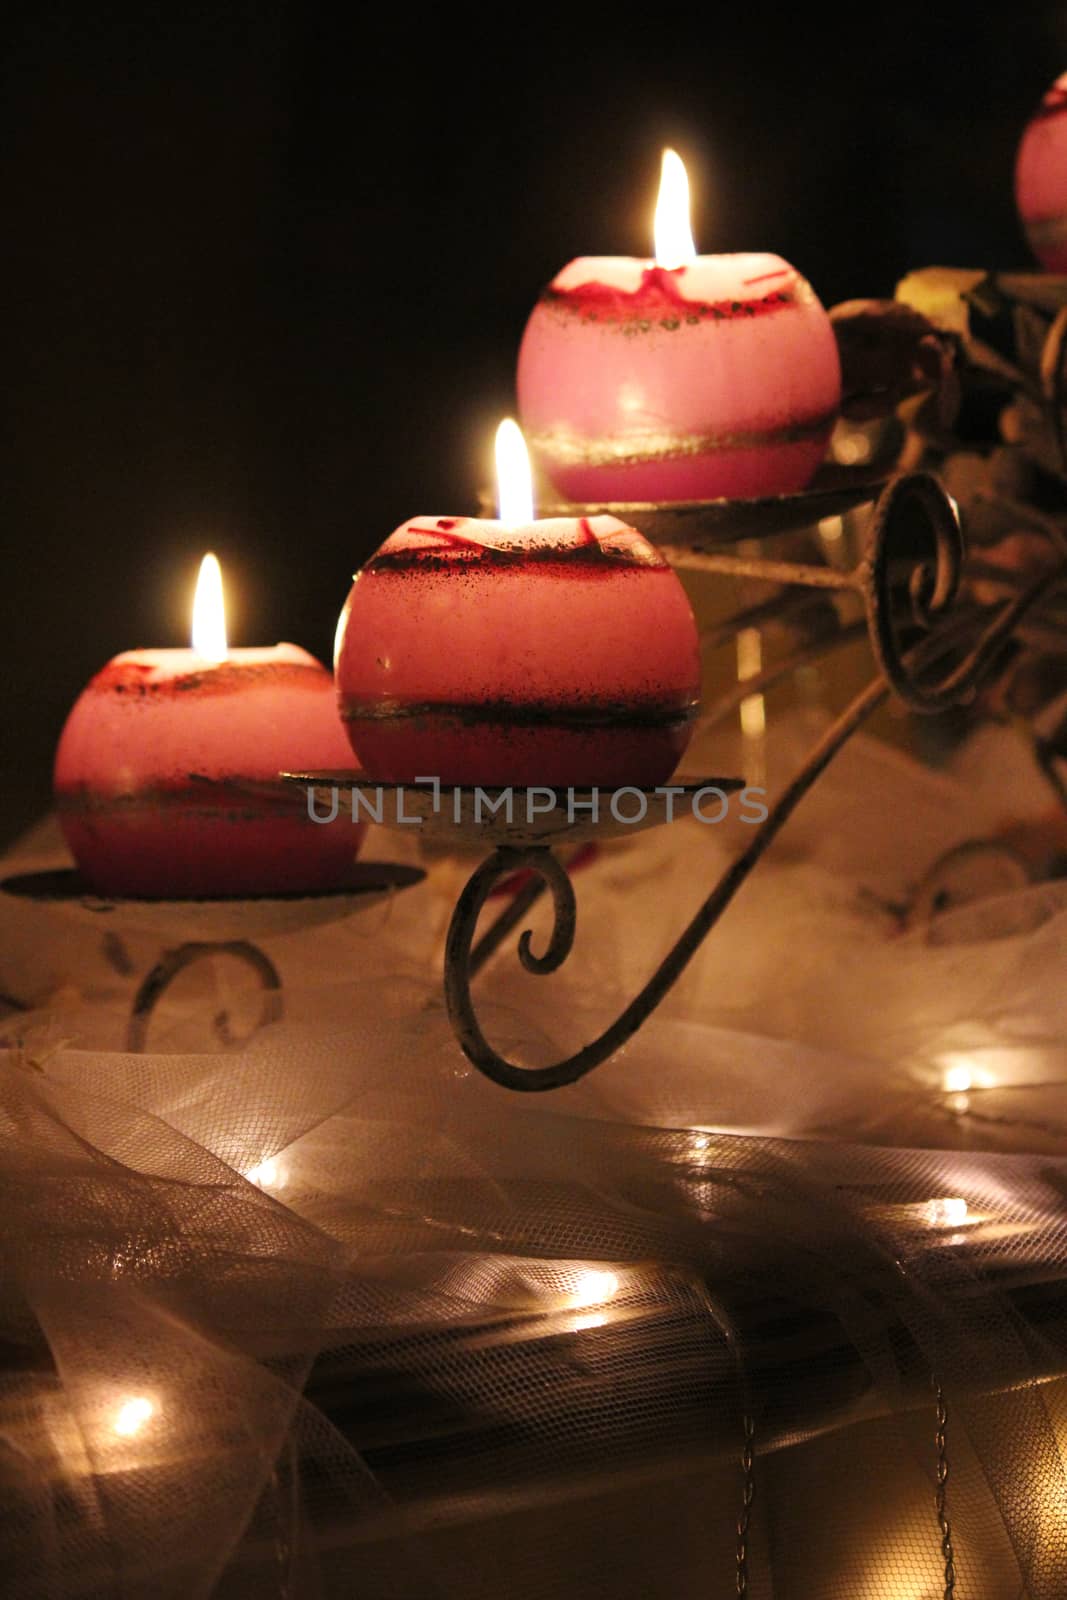 Round pinkish, lit candles on curved decorative stand. Set on a table with small decorative lights underneath the netting.